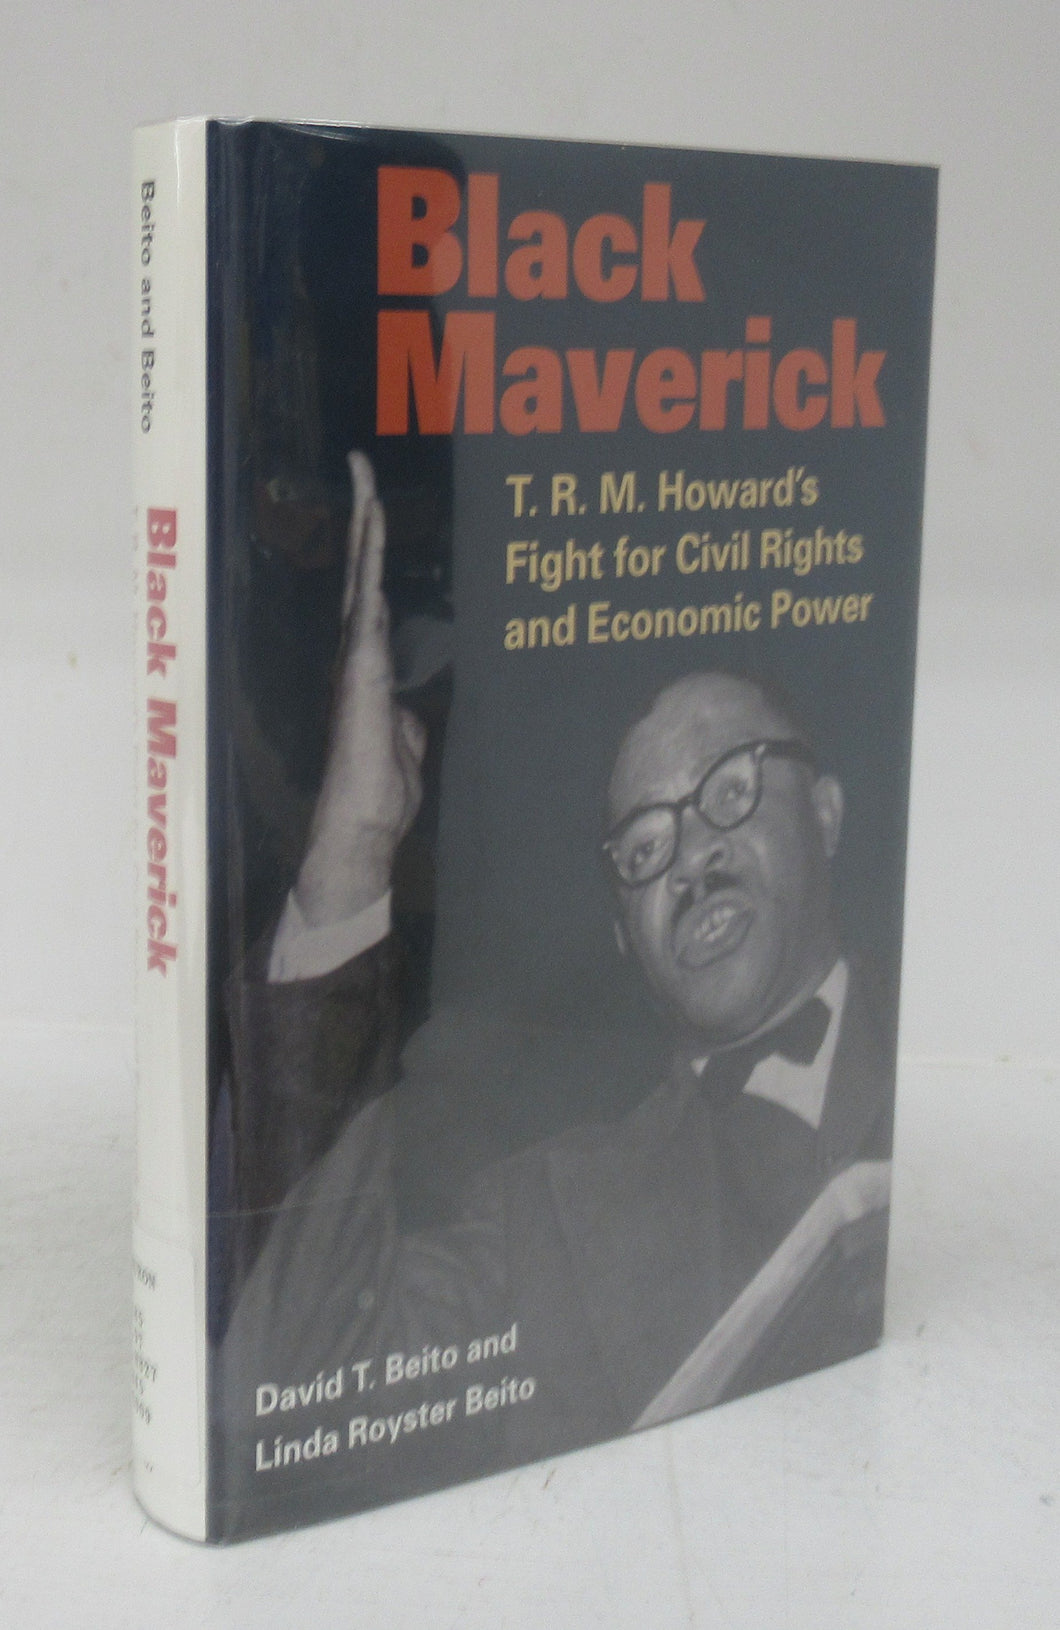 Black Maverick: T. R.M. Howard's Fight for Civil Rights and Economic Power